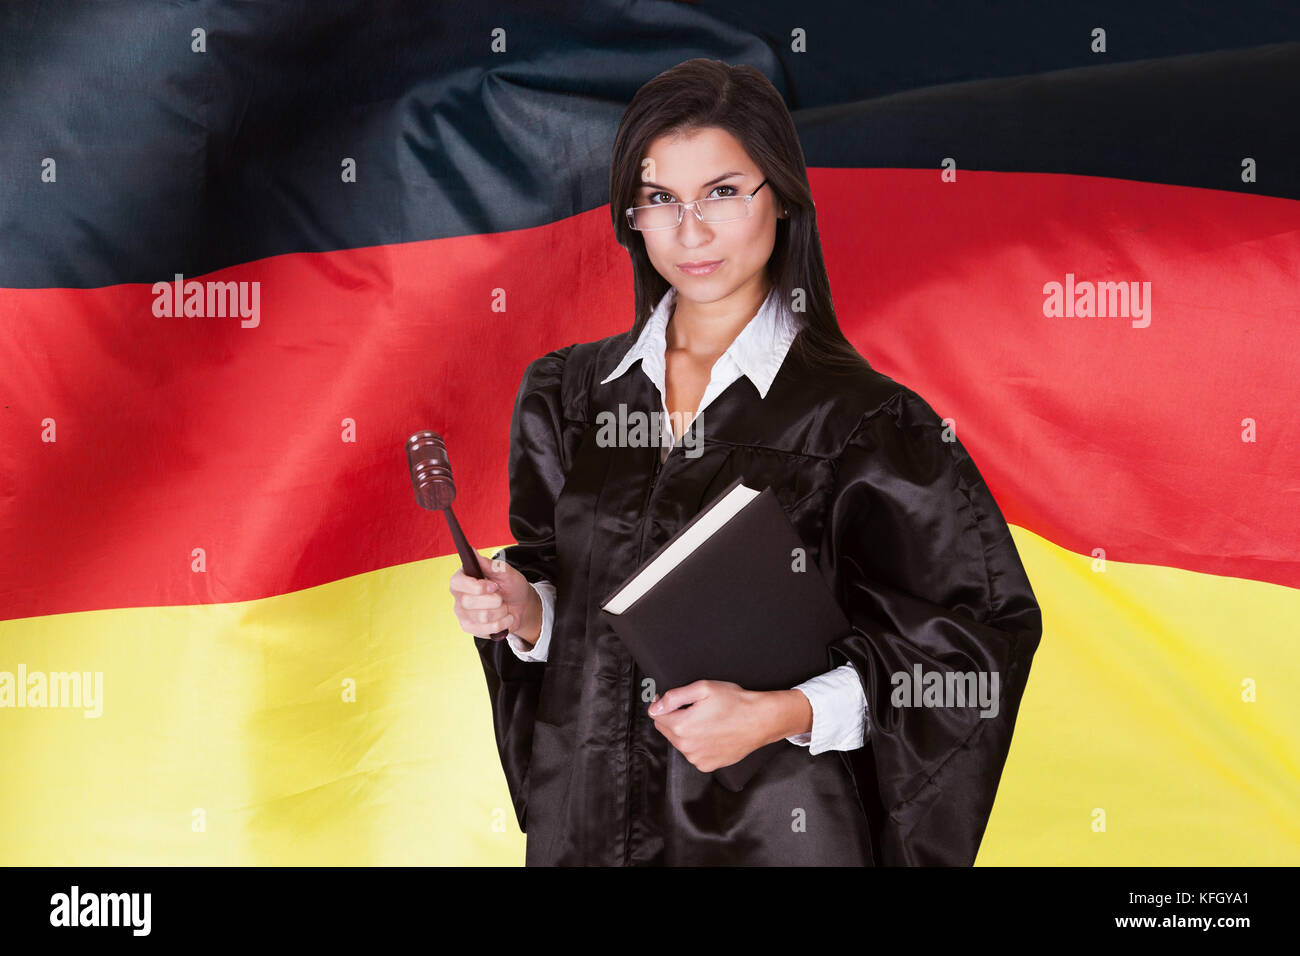 Confident Female Judge With Law Book And Wooden Gavel Standing In Front Of German Flag Stock Photo